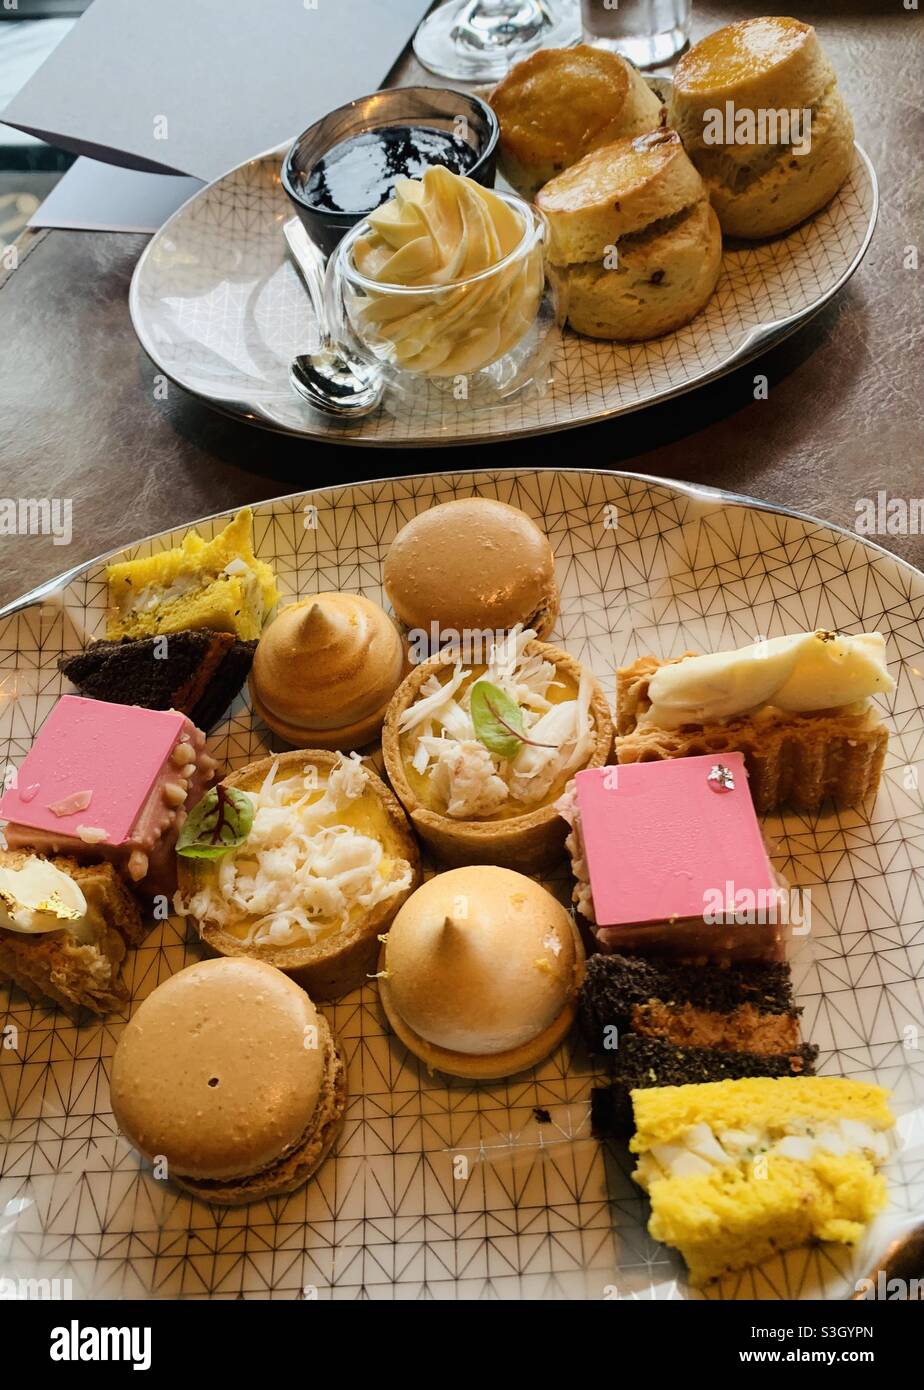 A plate of French pastries during High Tea at the Rosewood hotel in Hong Kong. Stock Photo